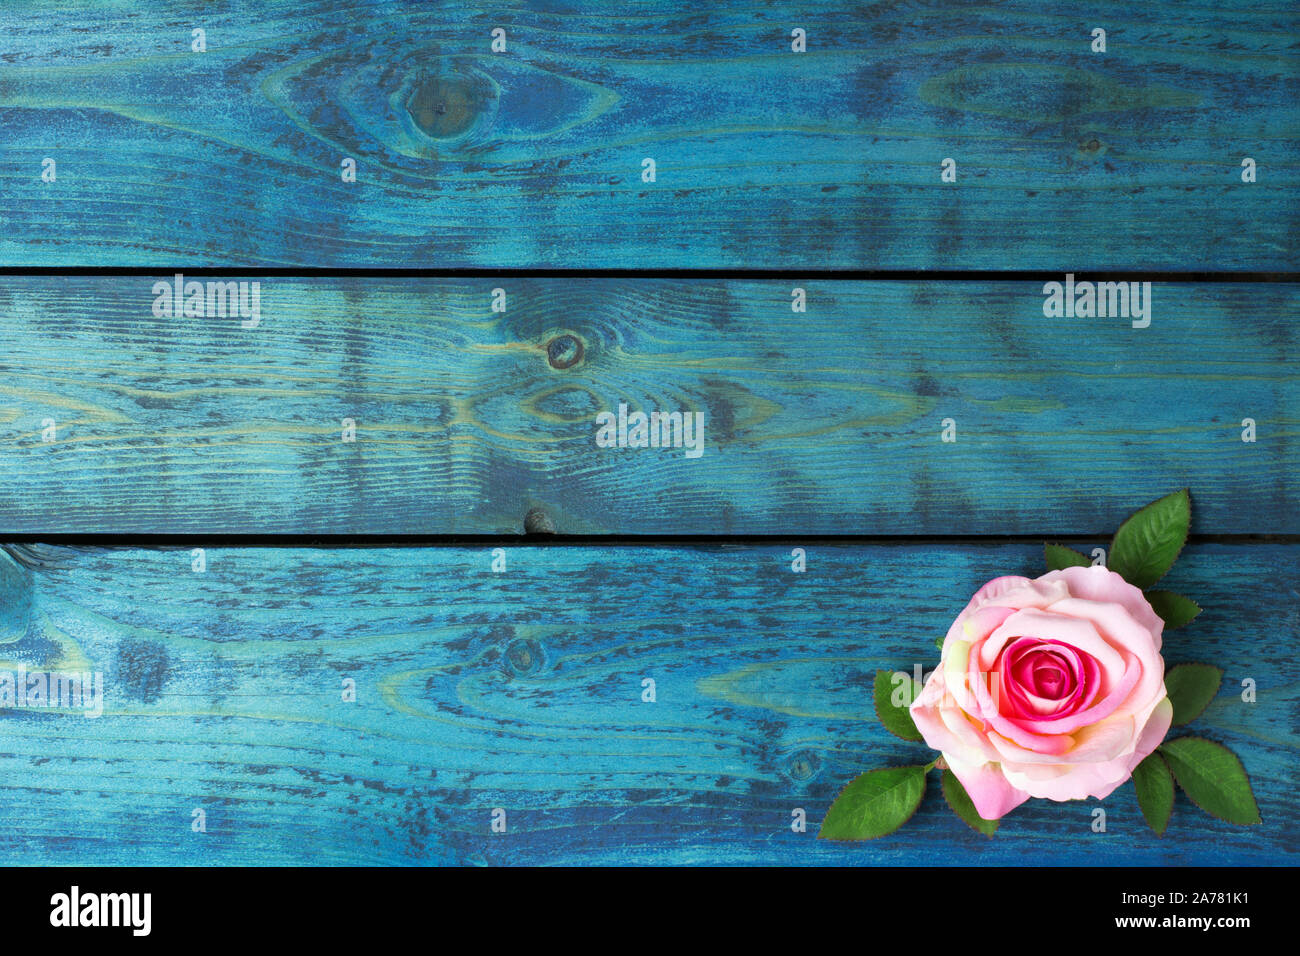 Romantic background with single pink rose on blue wooden background Stock Photo